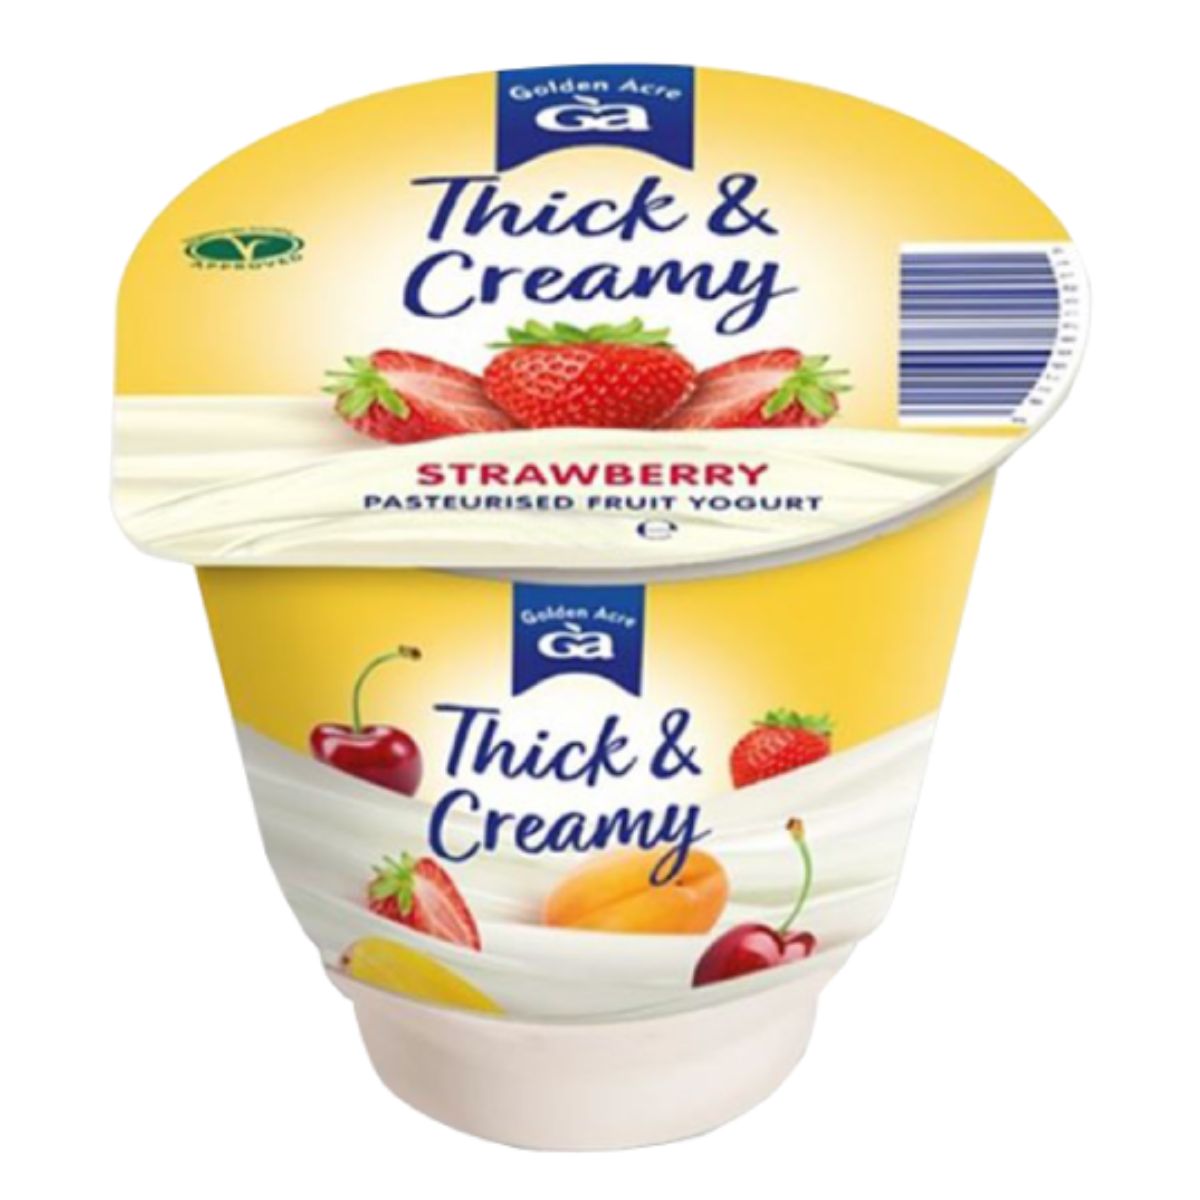 A cup of Golden Acre - Thick & Creamy Pasteurised Strawberry Yogurt - 125g.